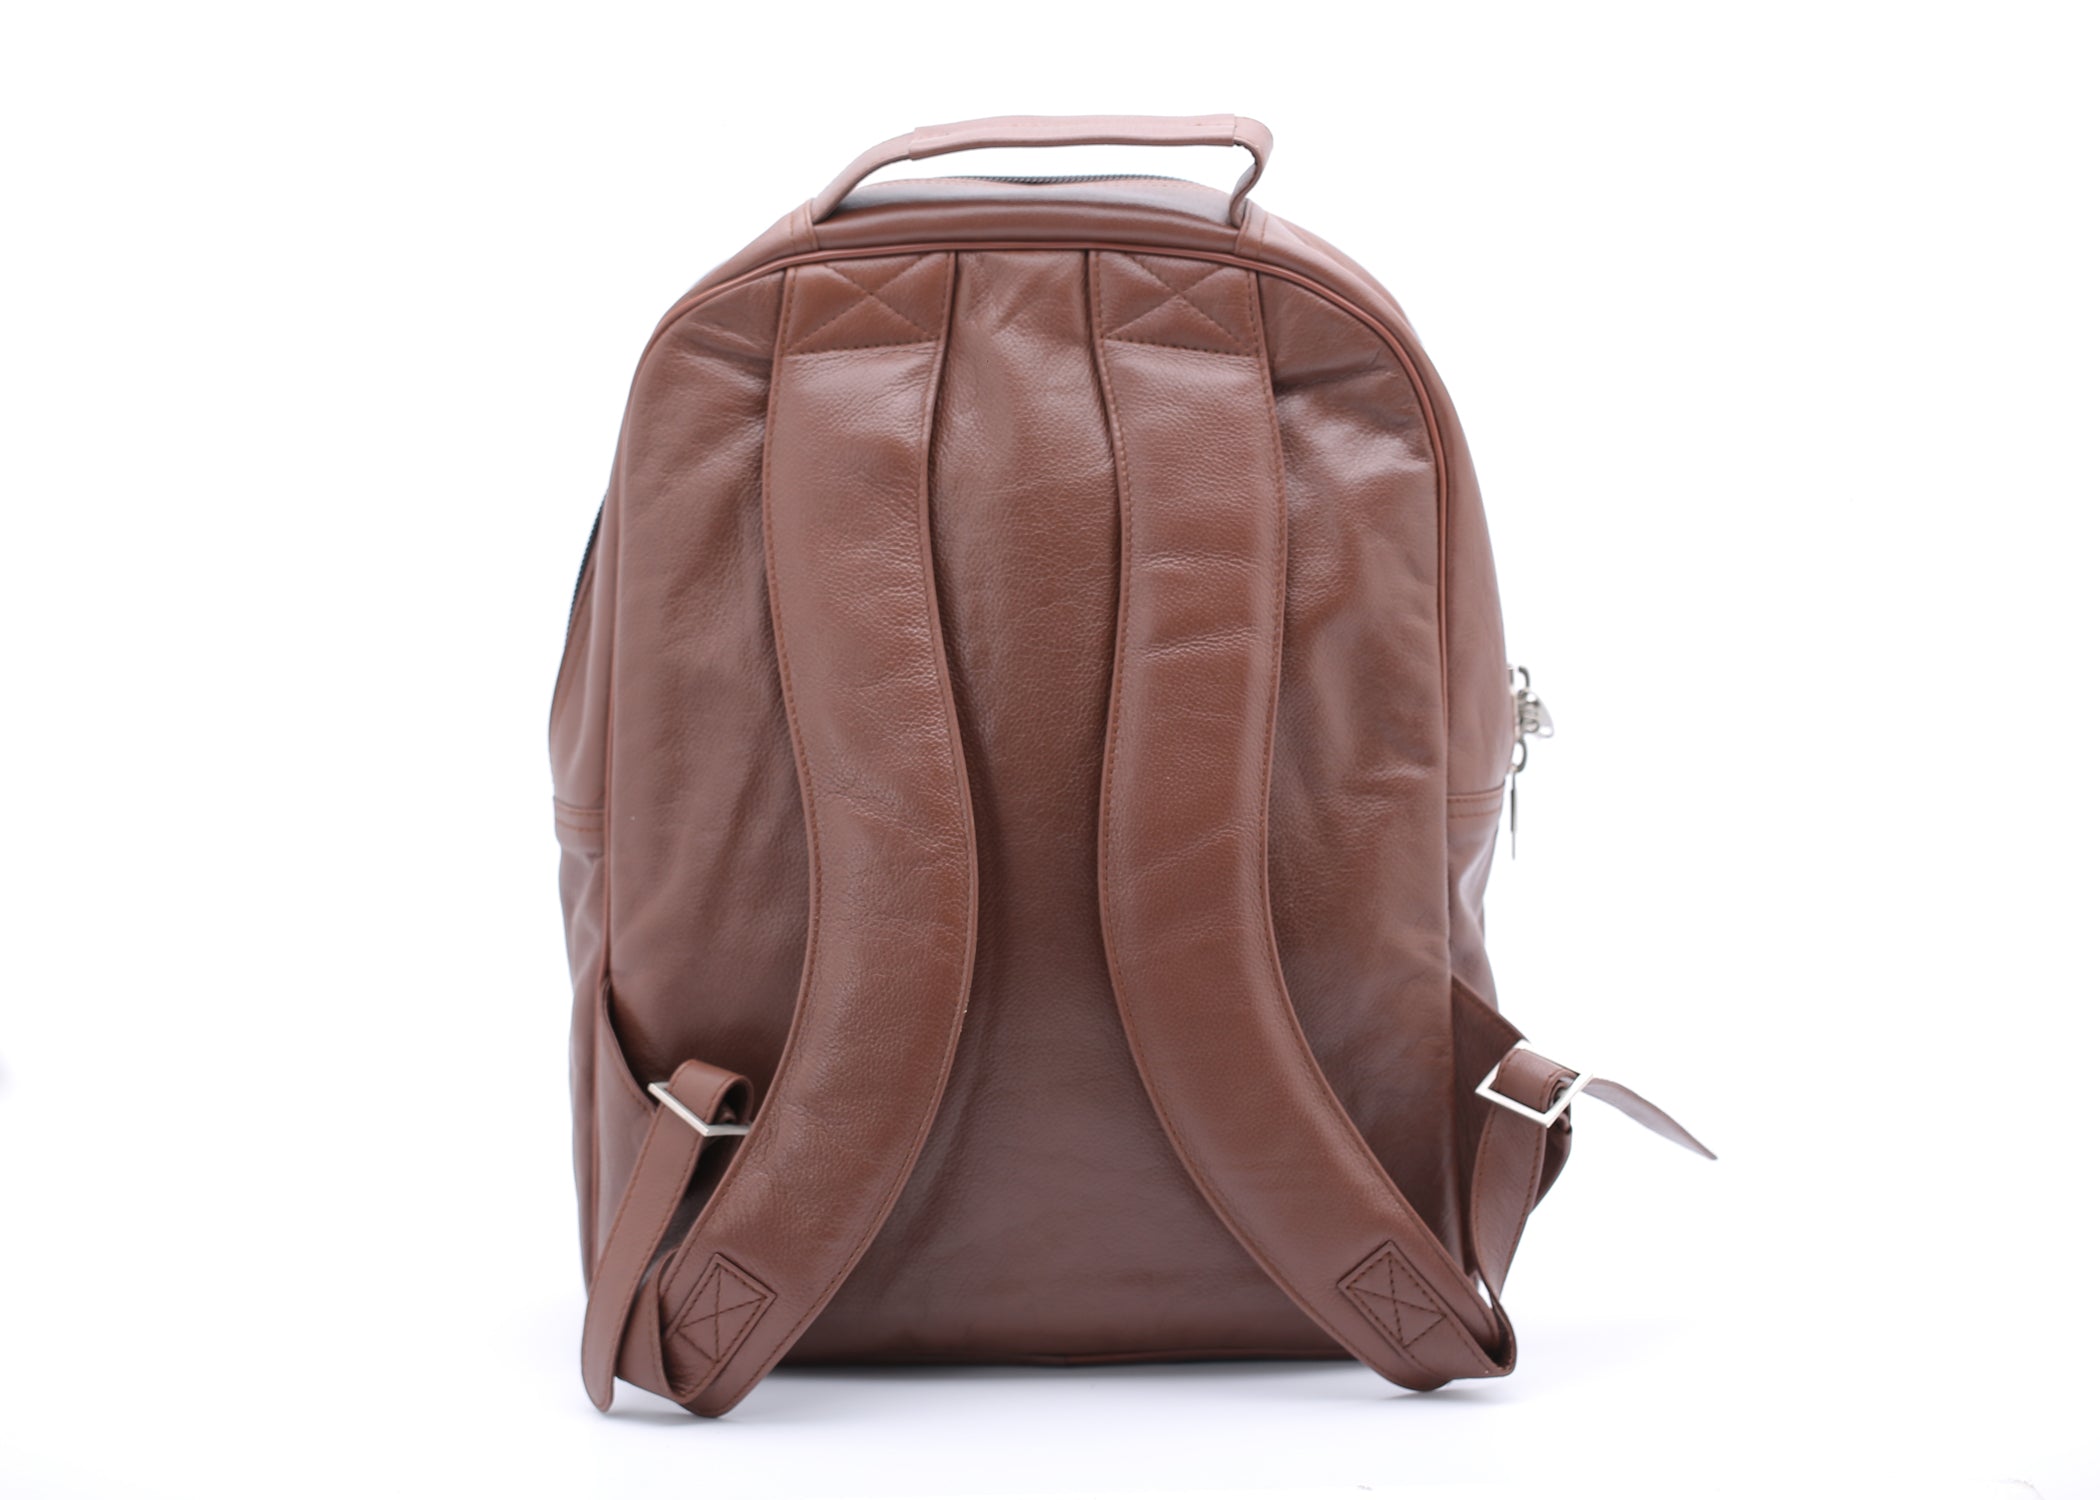 Trio Tan Leather Backpack